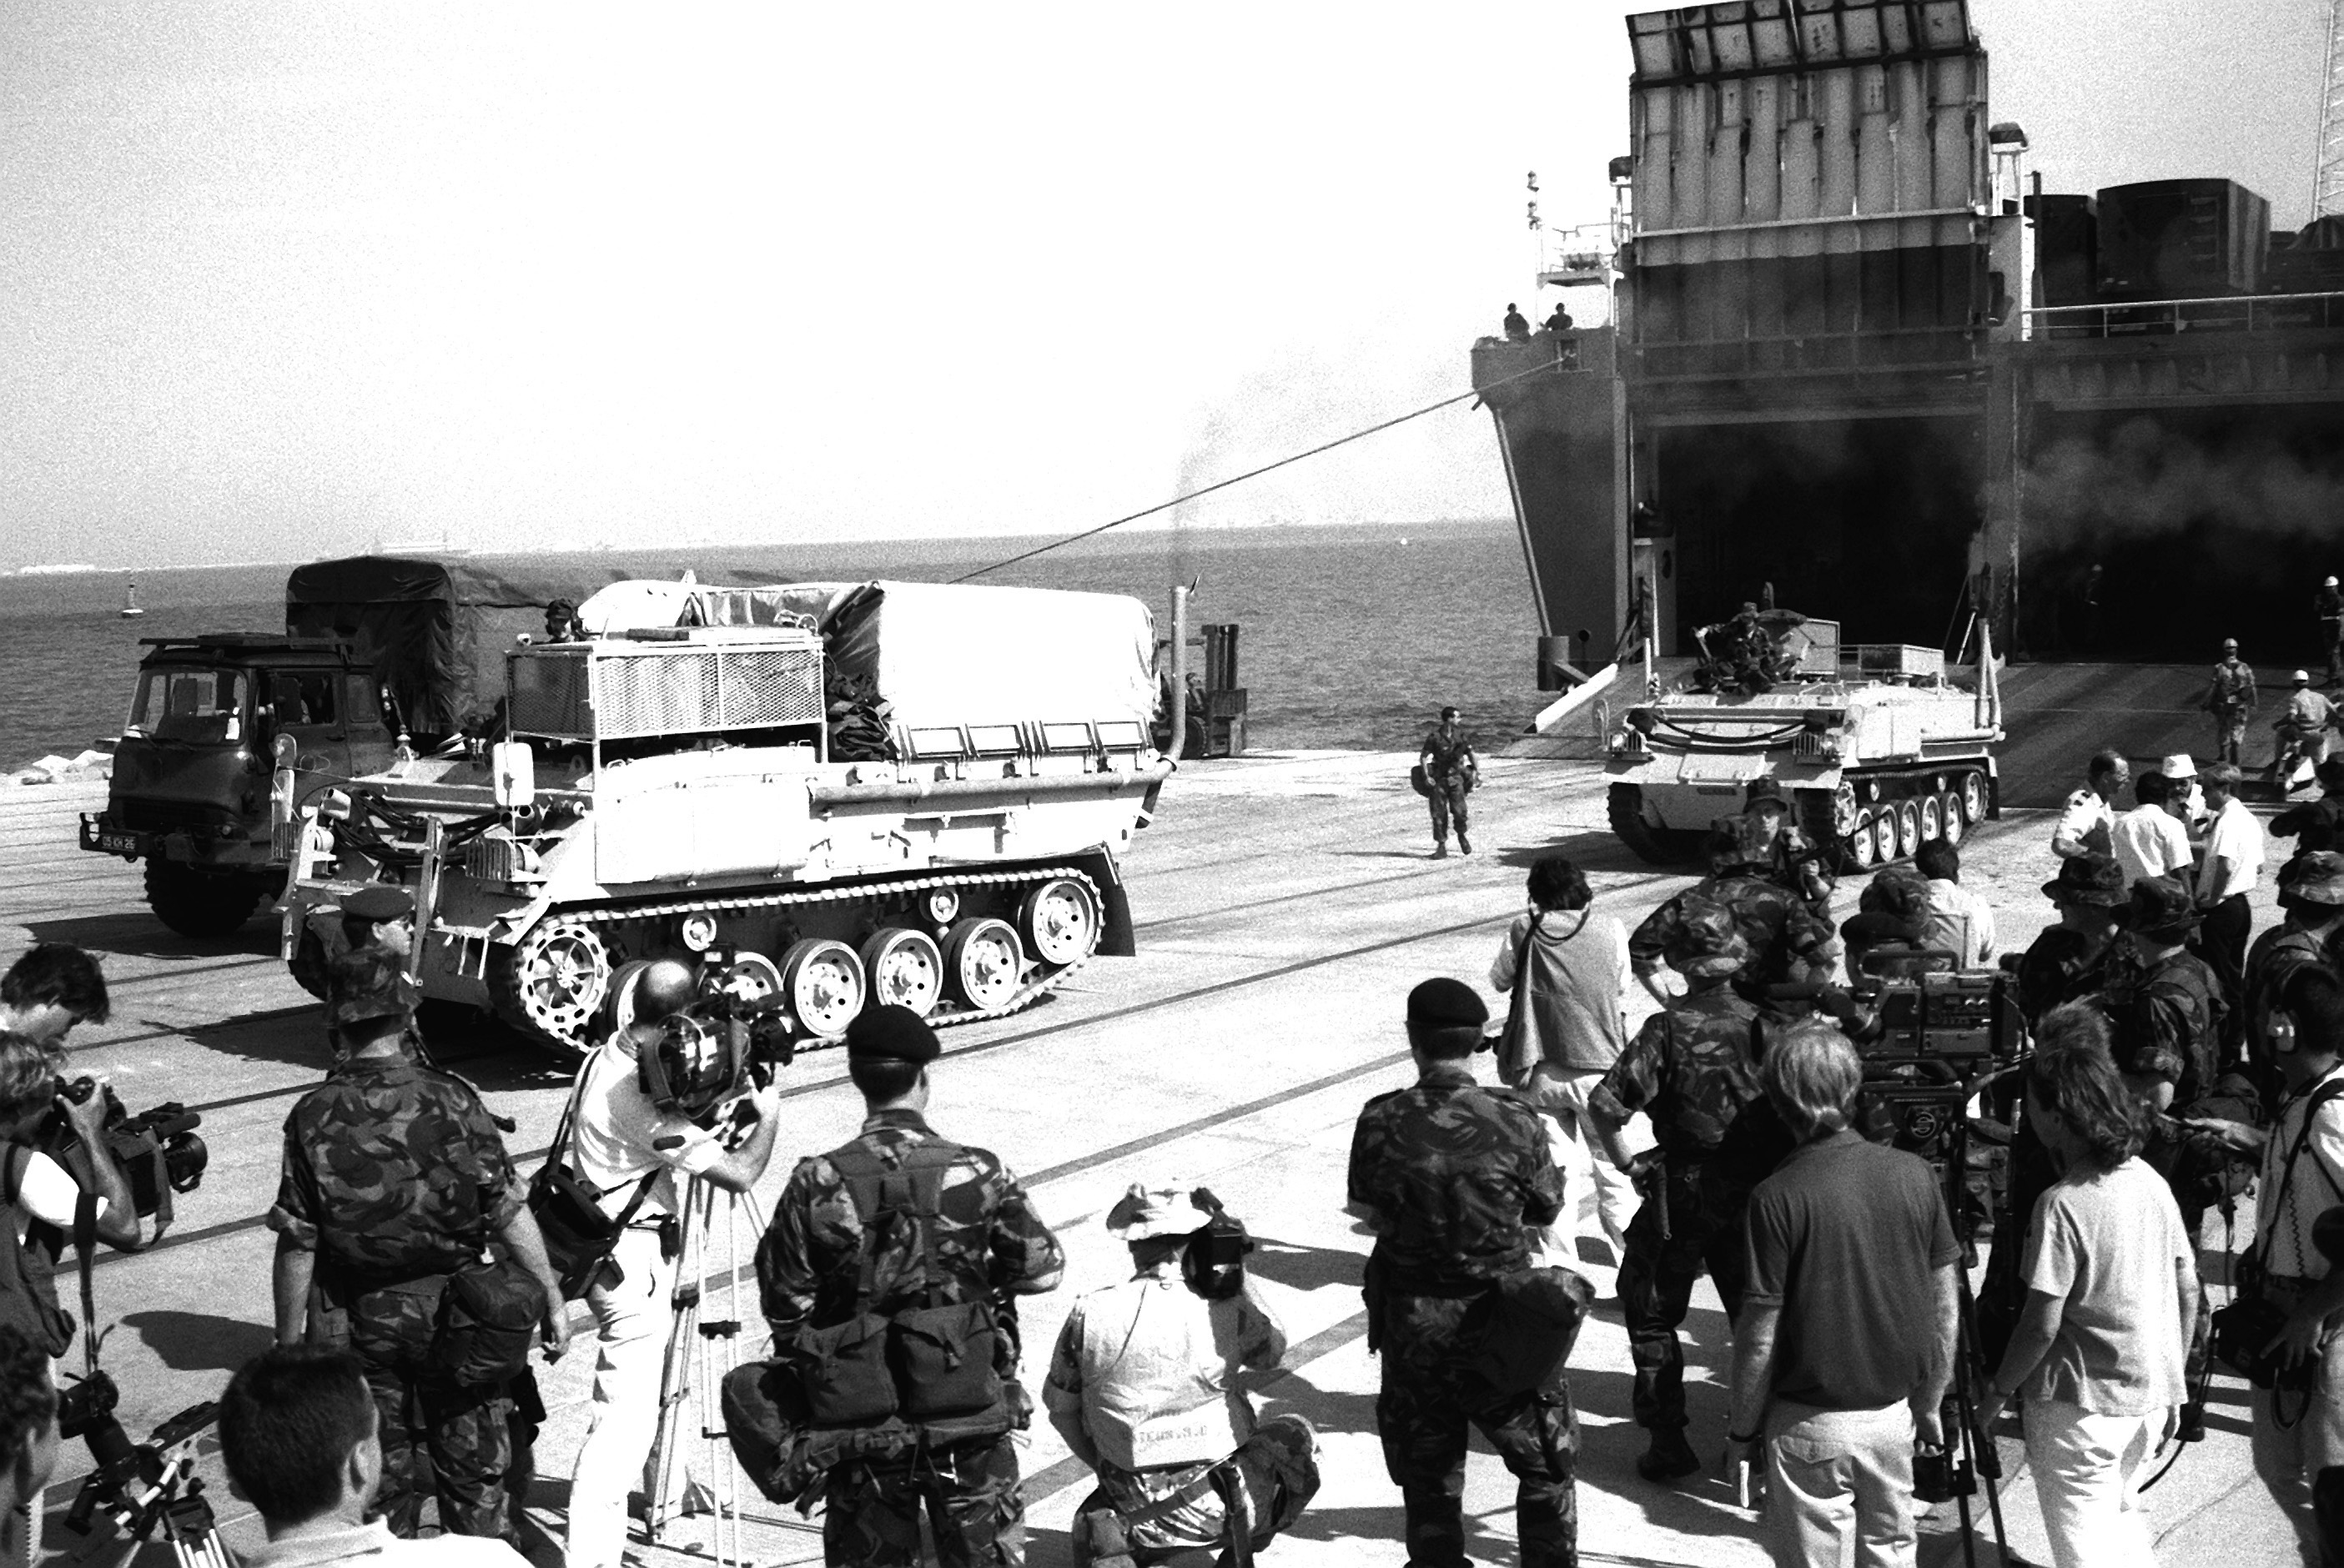 Two British FV432 armored vehicles leave the Danish cargo ship Dana Cimbria during Operation Desert Shield